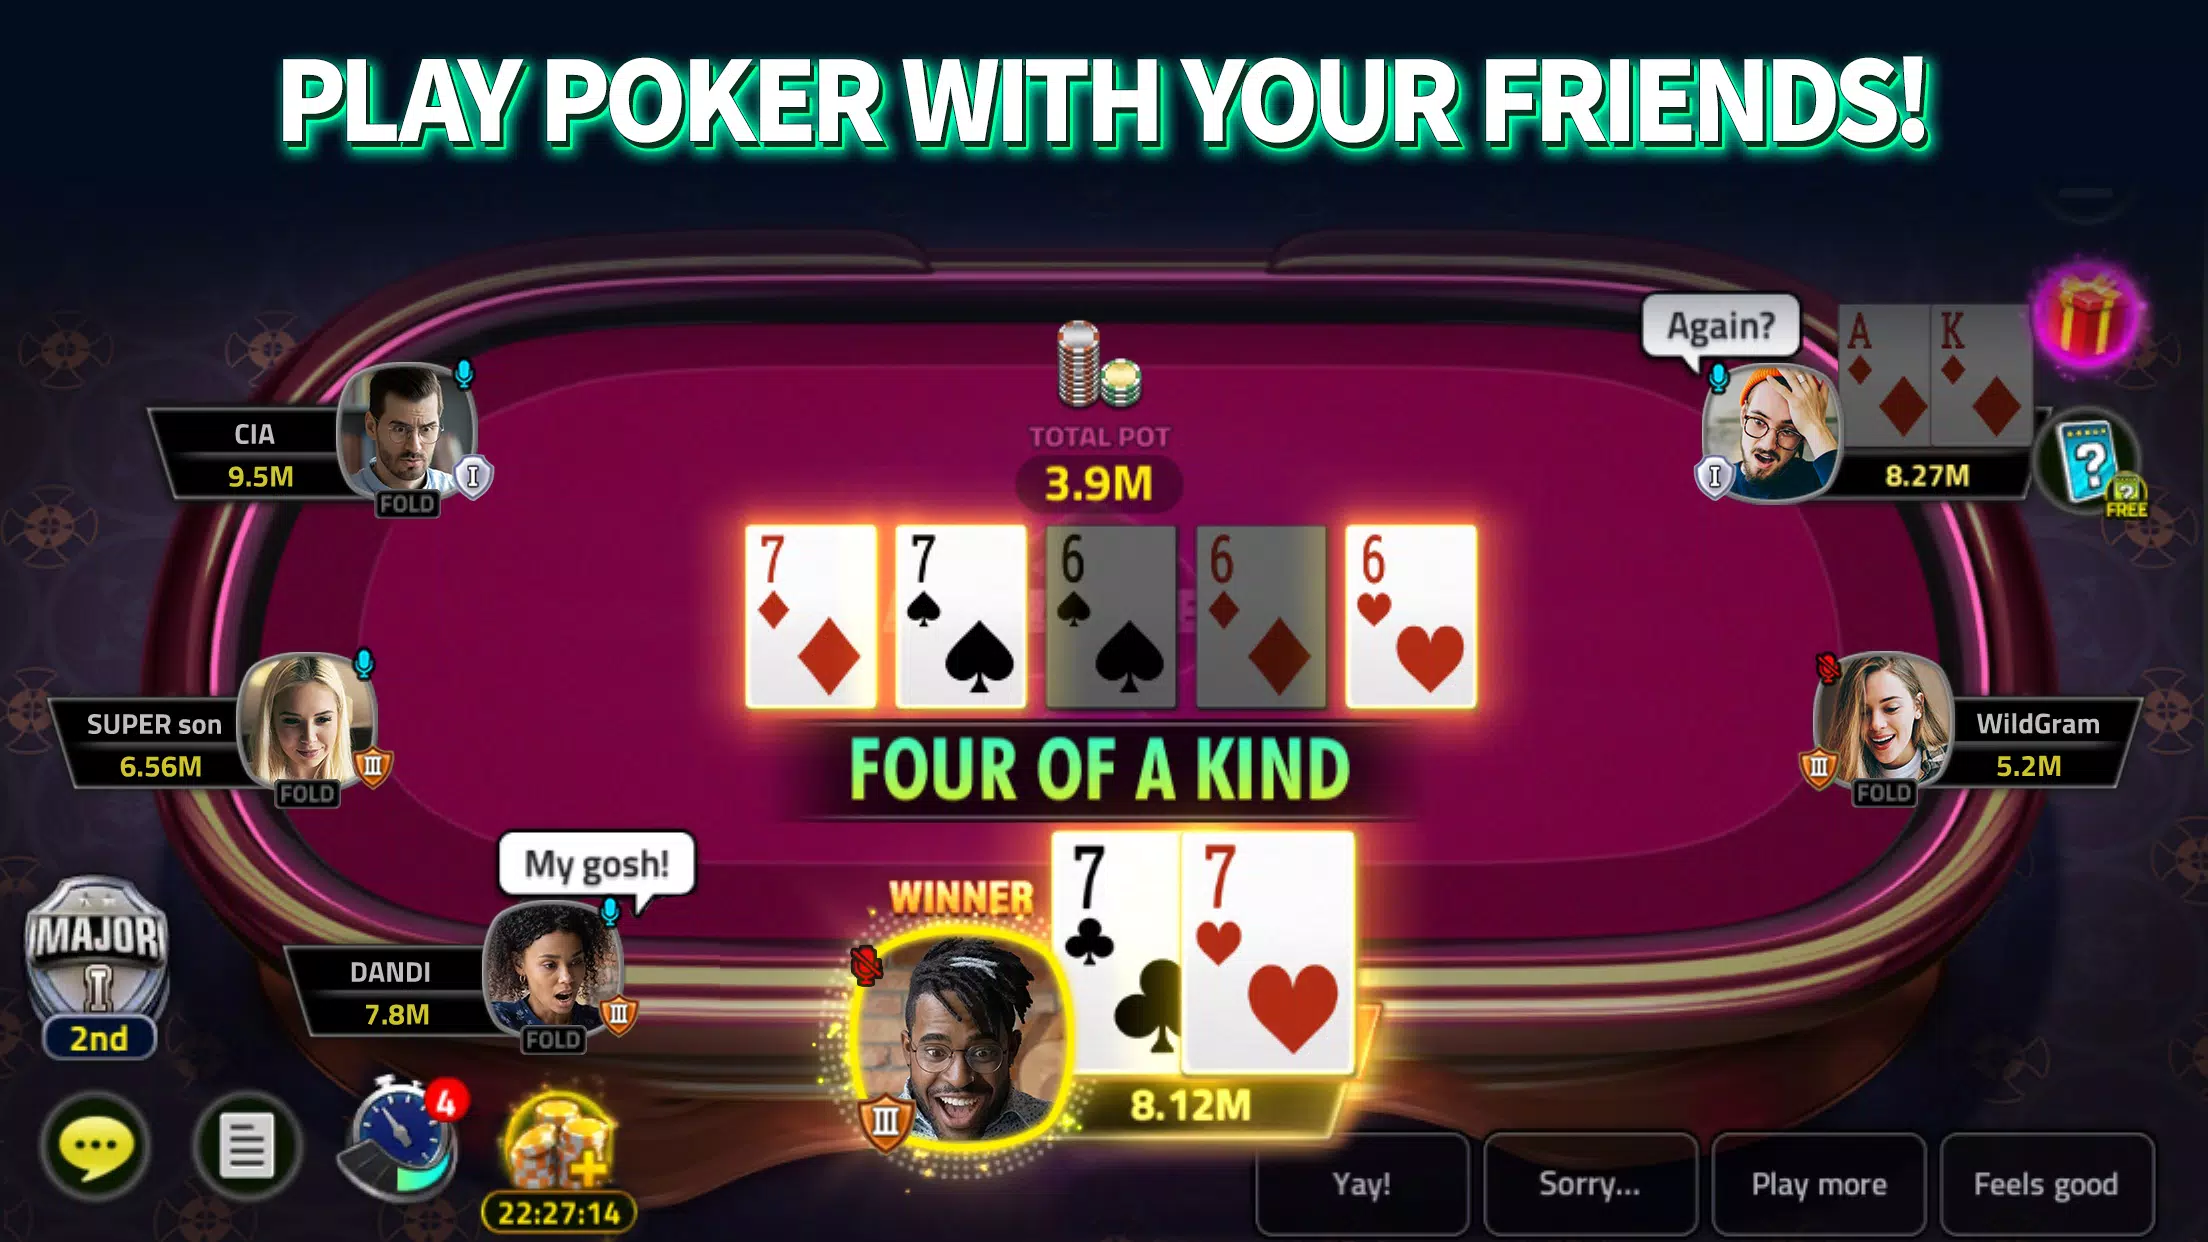 Poker Texas Holdem Face Online for Android - APK Download